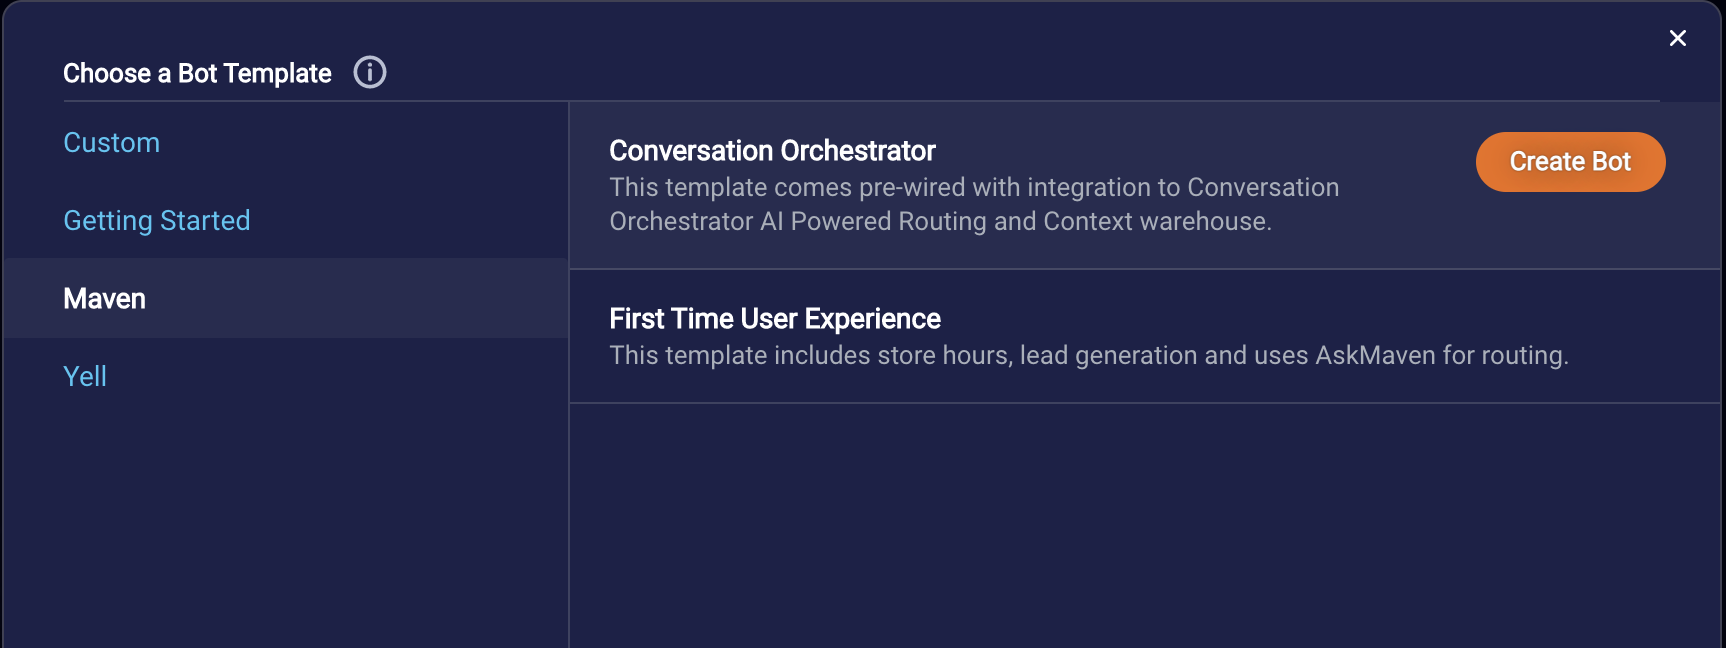 The Conversation Orchestrator bot template option